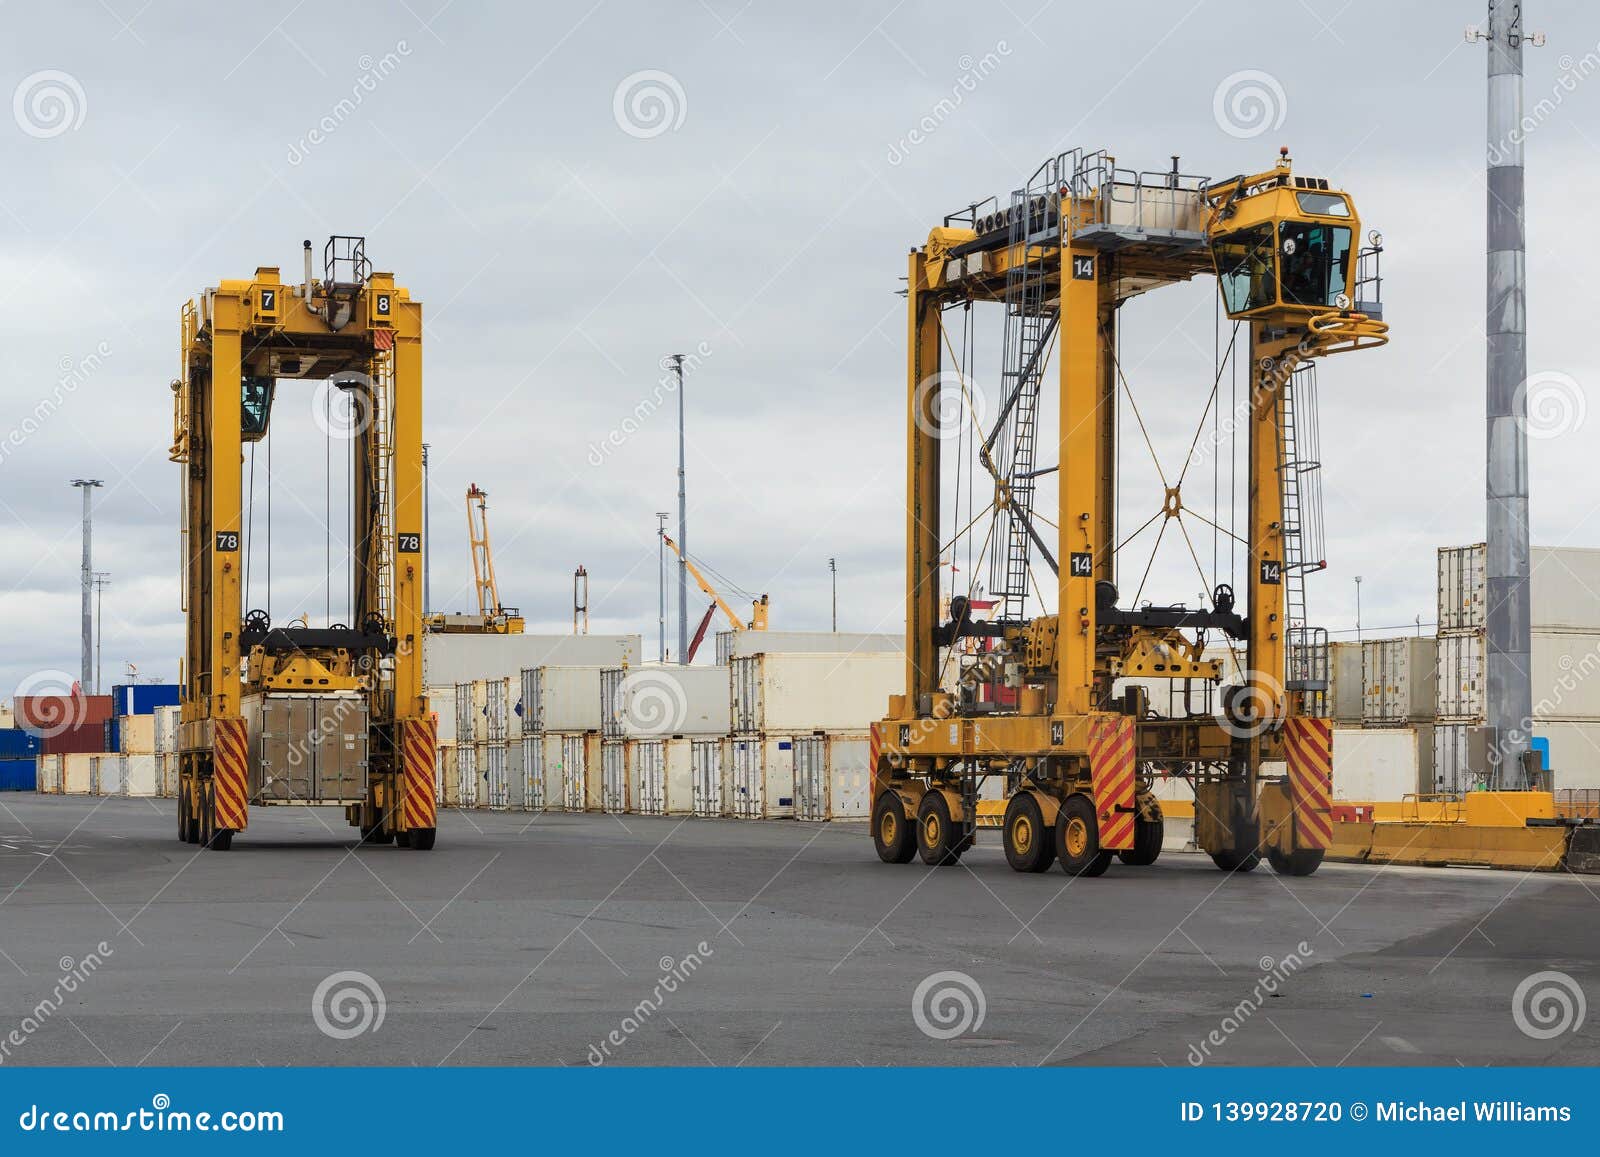 straddle carriers in a busy port